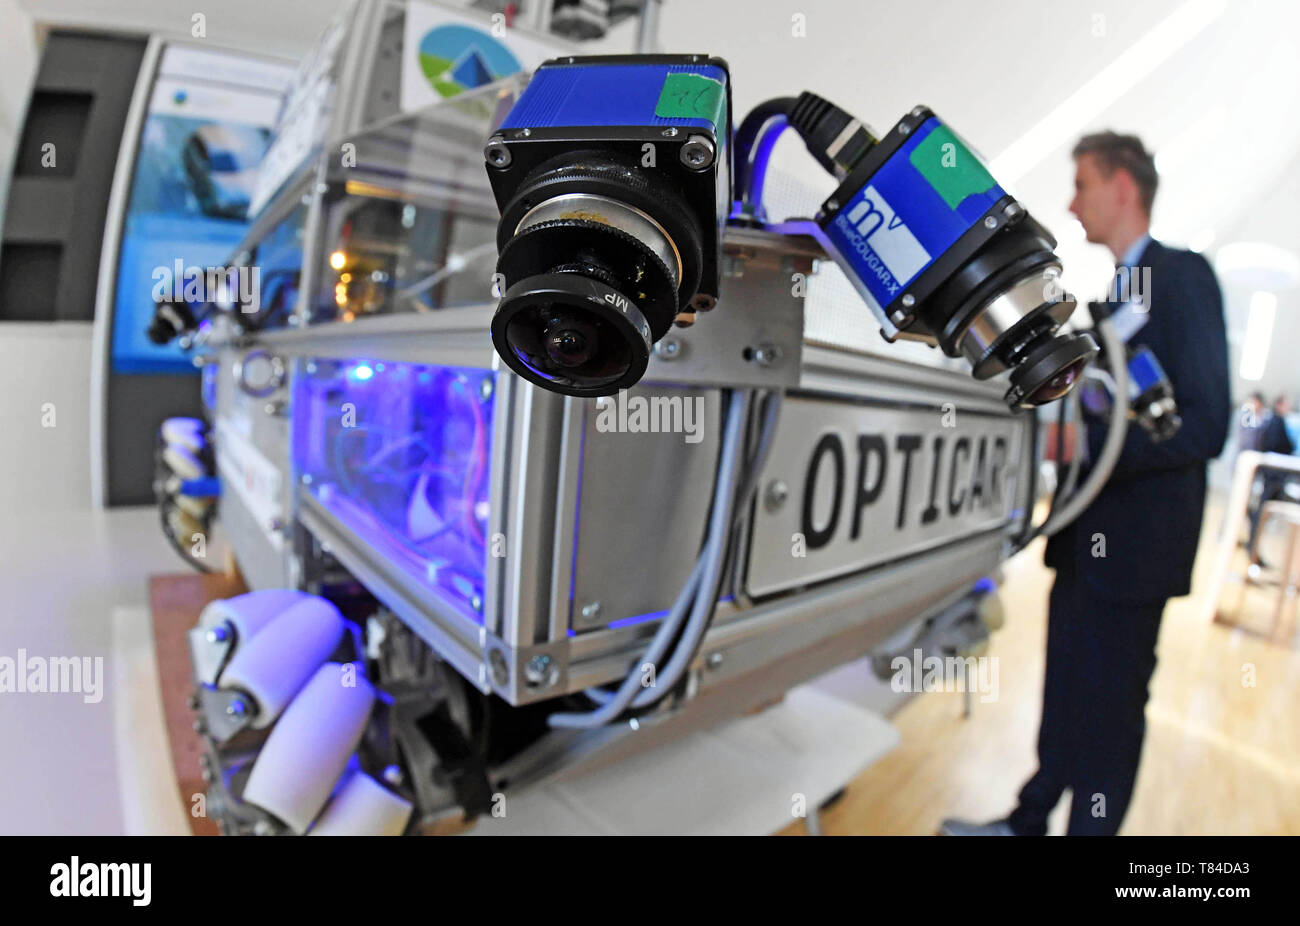 Karlsruhe, Germany. 10th May, 2019. OPTICAR will be shown at the Karlsruhe  Institute of Technology (KIT). The Opticar is a mobile test platform used  to test and further develop new camera systems